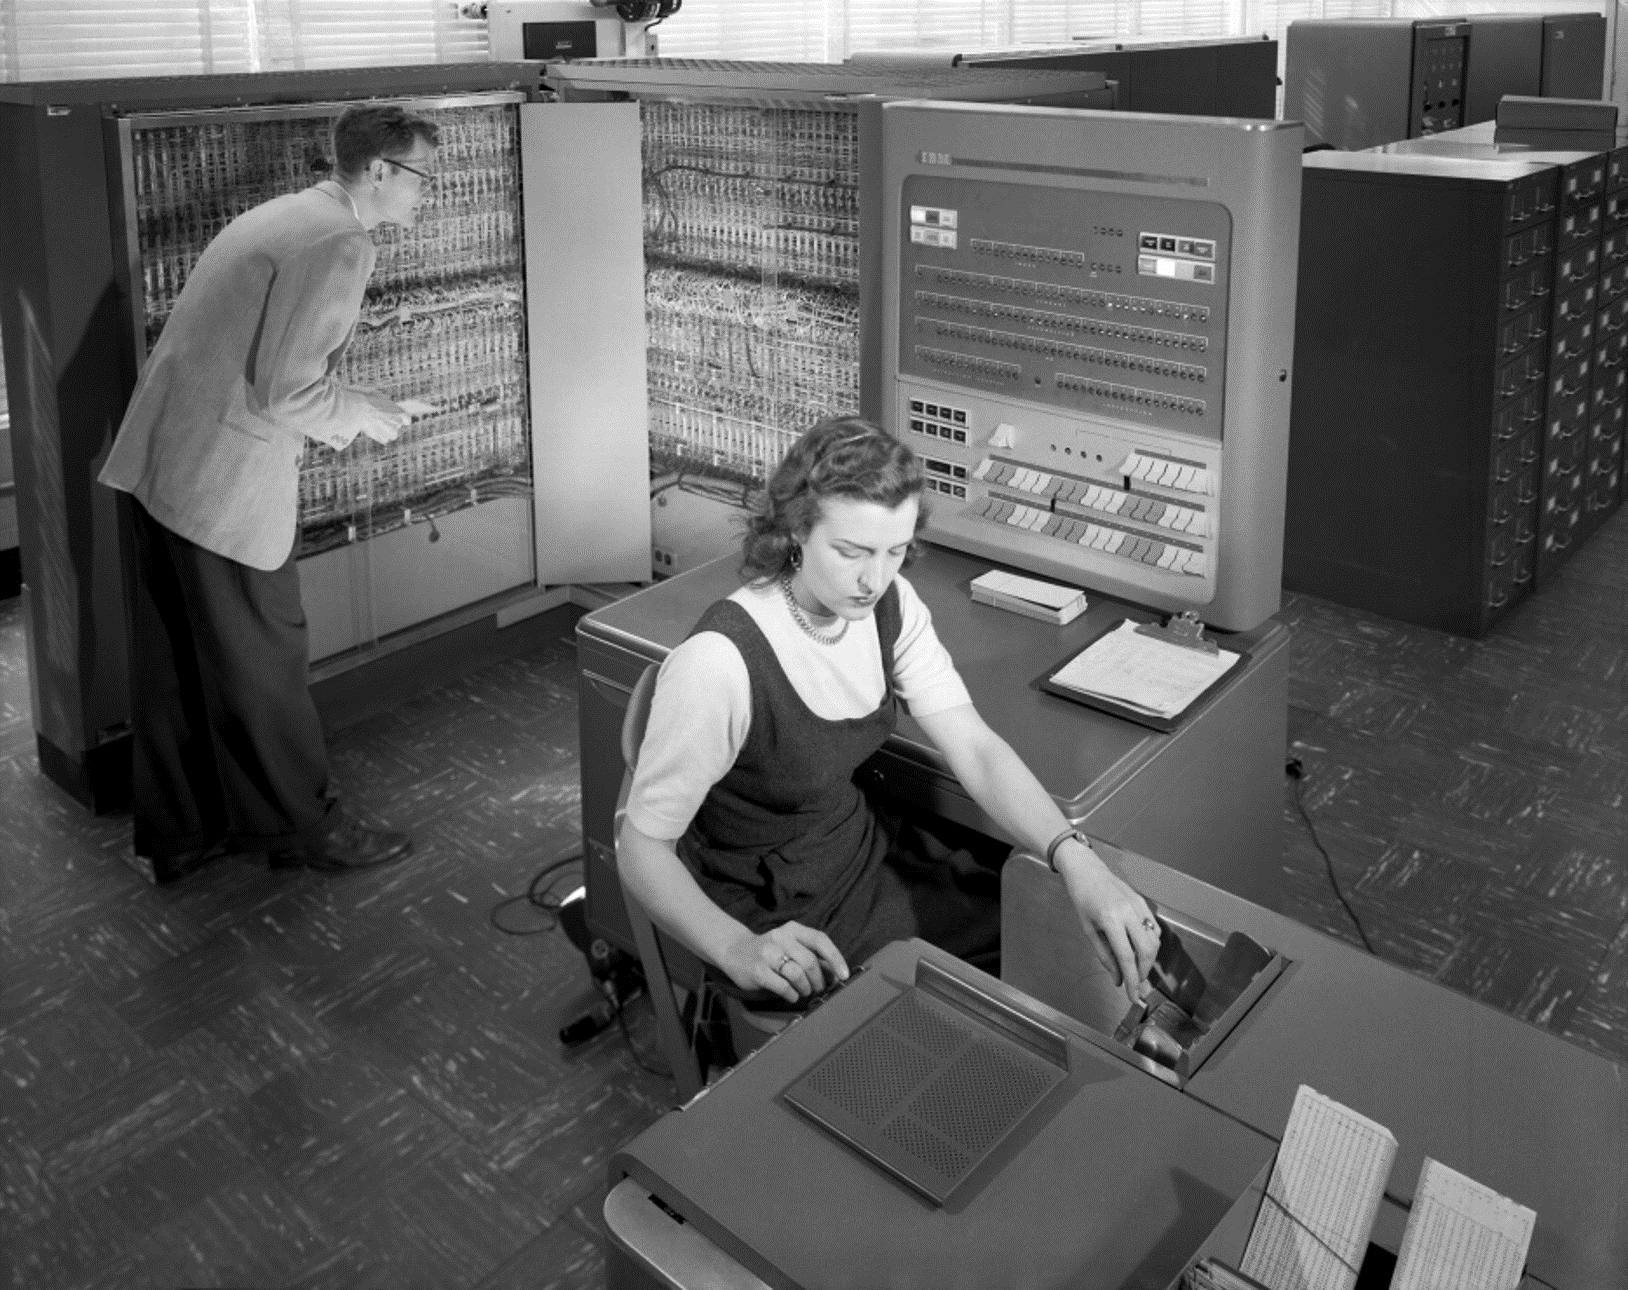 Man and woman shown working with IBM type 704 electronic data processing machine used for making computations for aeronautical research at Langley Research Center.